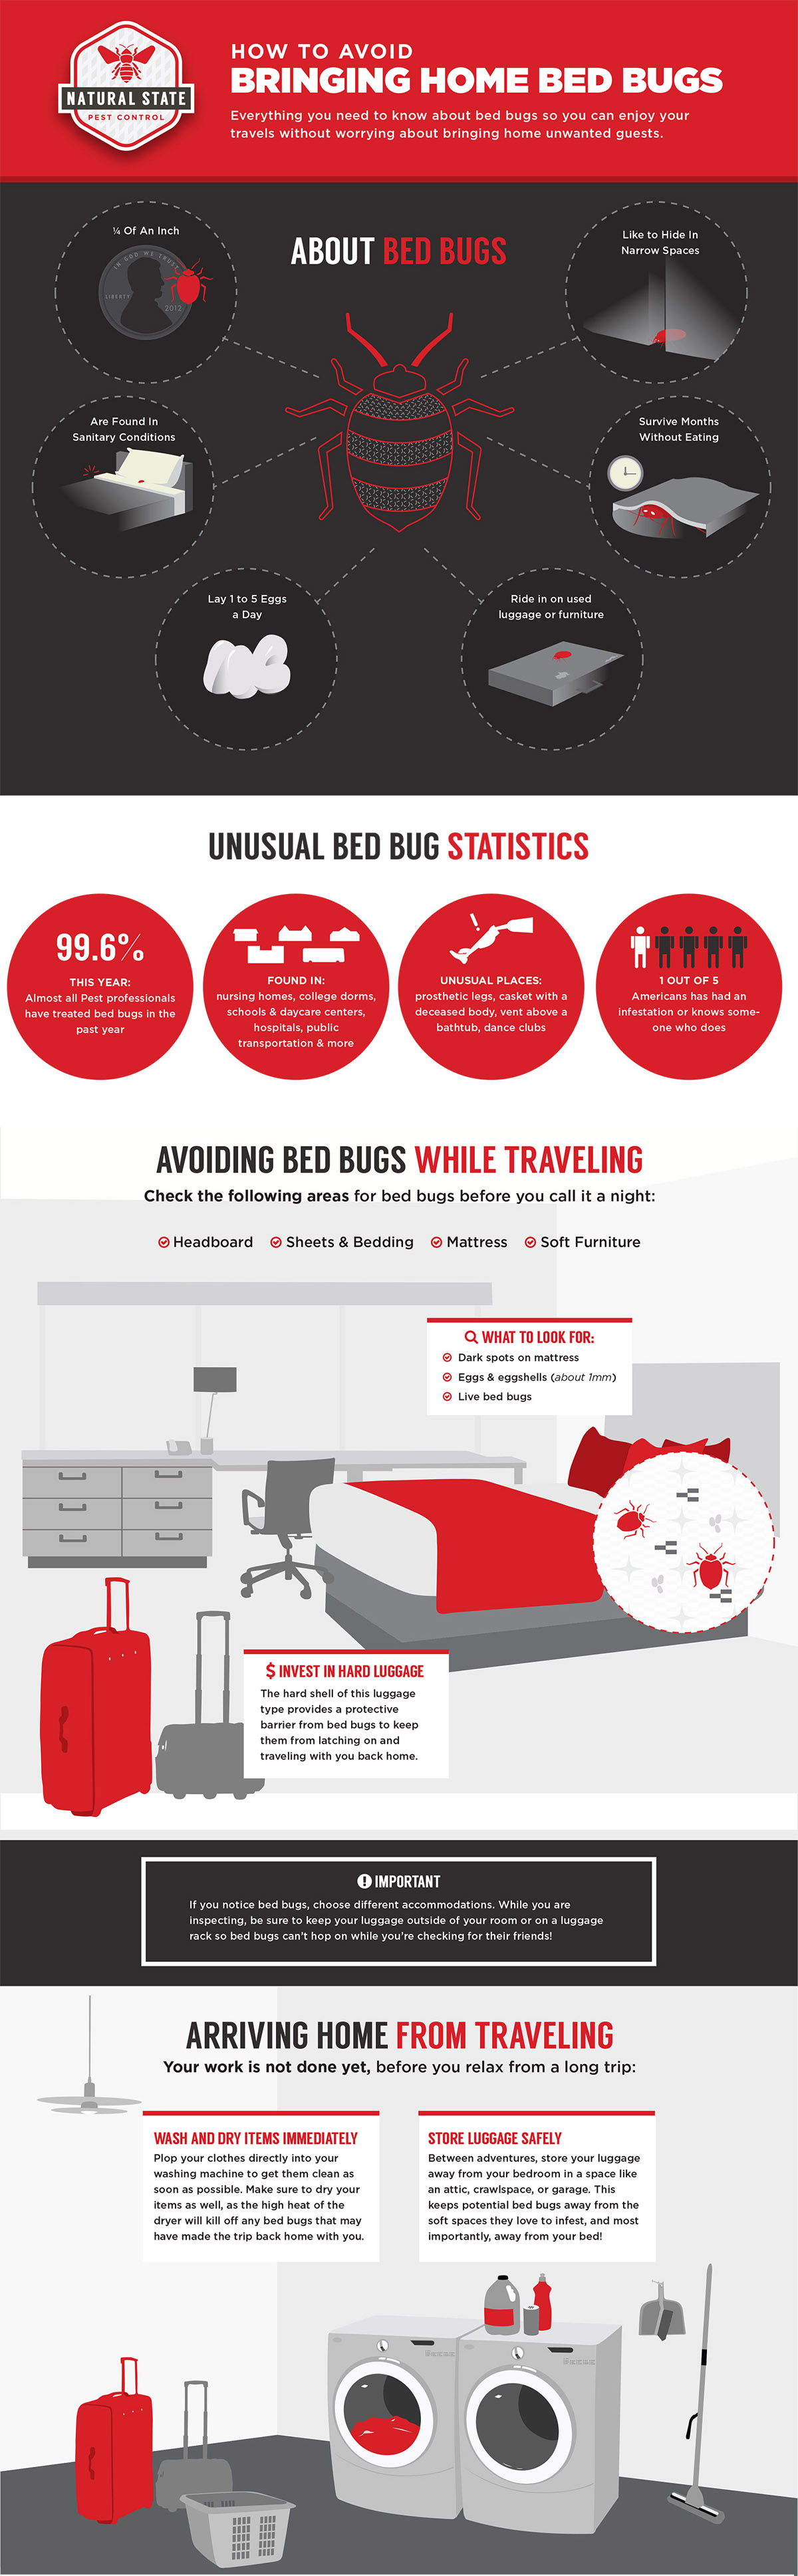 How to Avoid Bringing Home Bed Bugs While Traveling